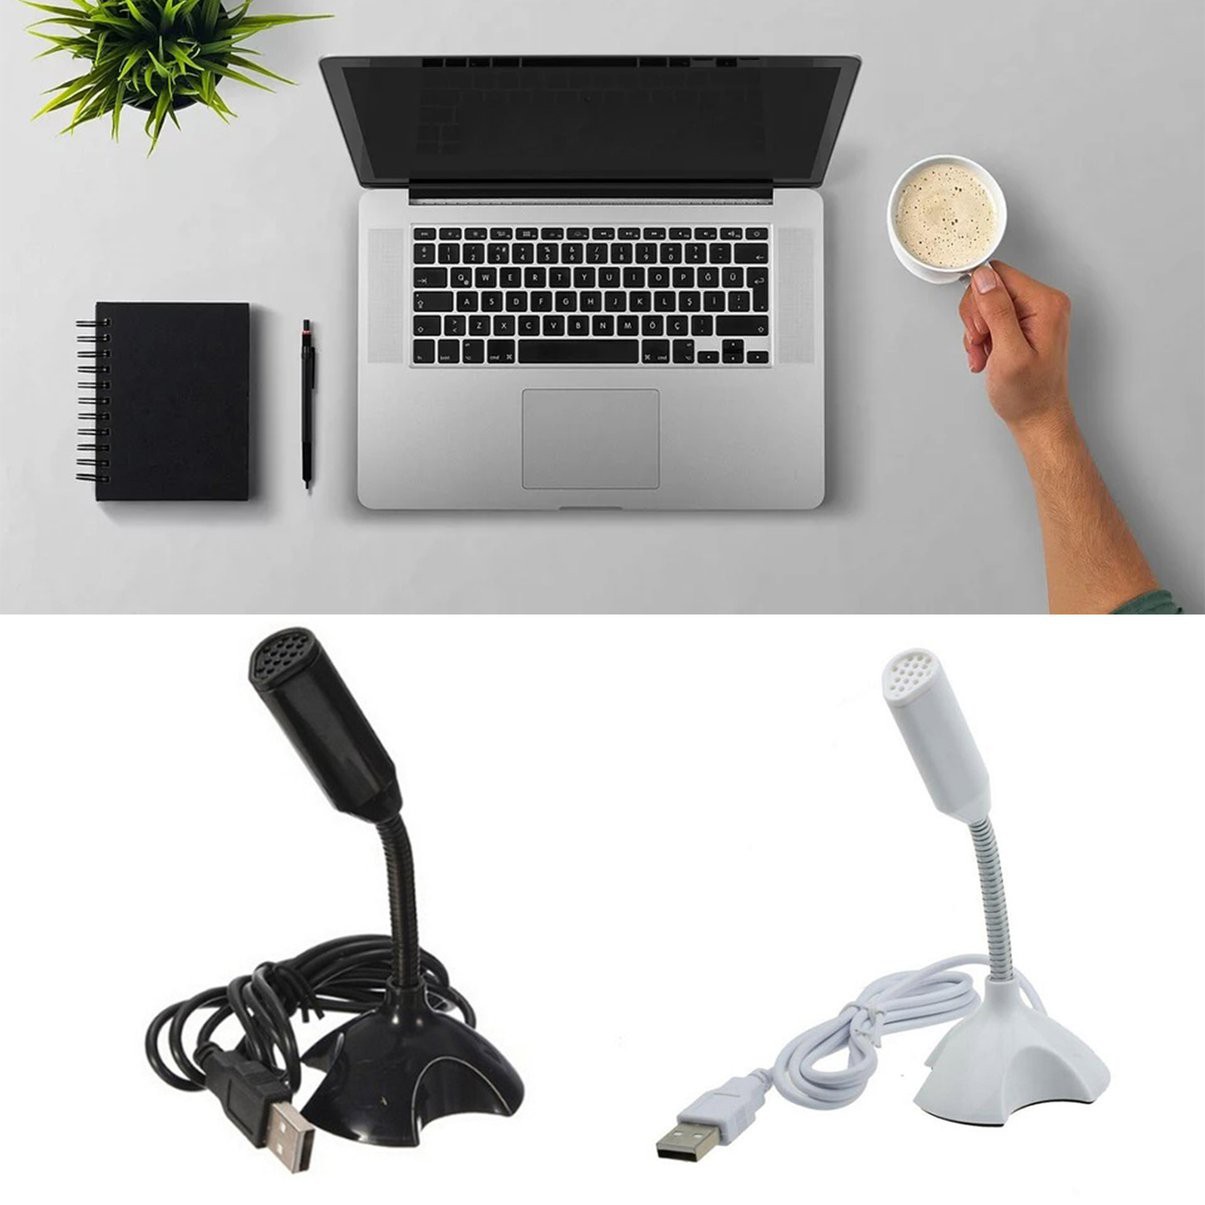 Dedicate USB Capacitive Mini Microphone Stand for PC Laptop Notebook Online Chat Recording Wired Device